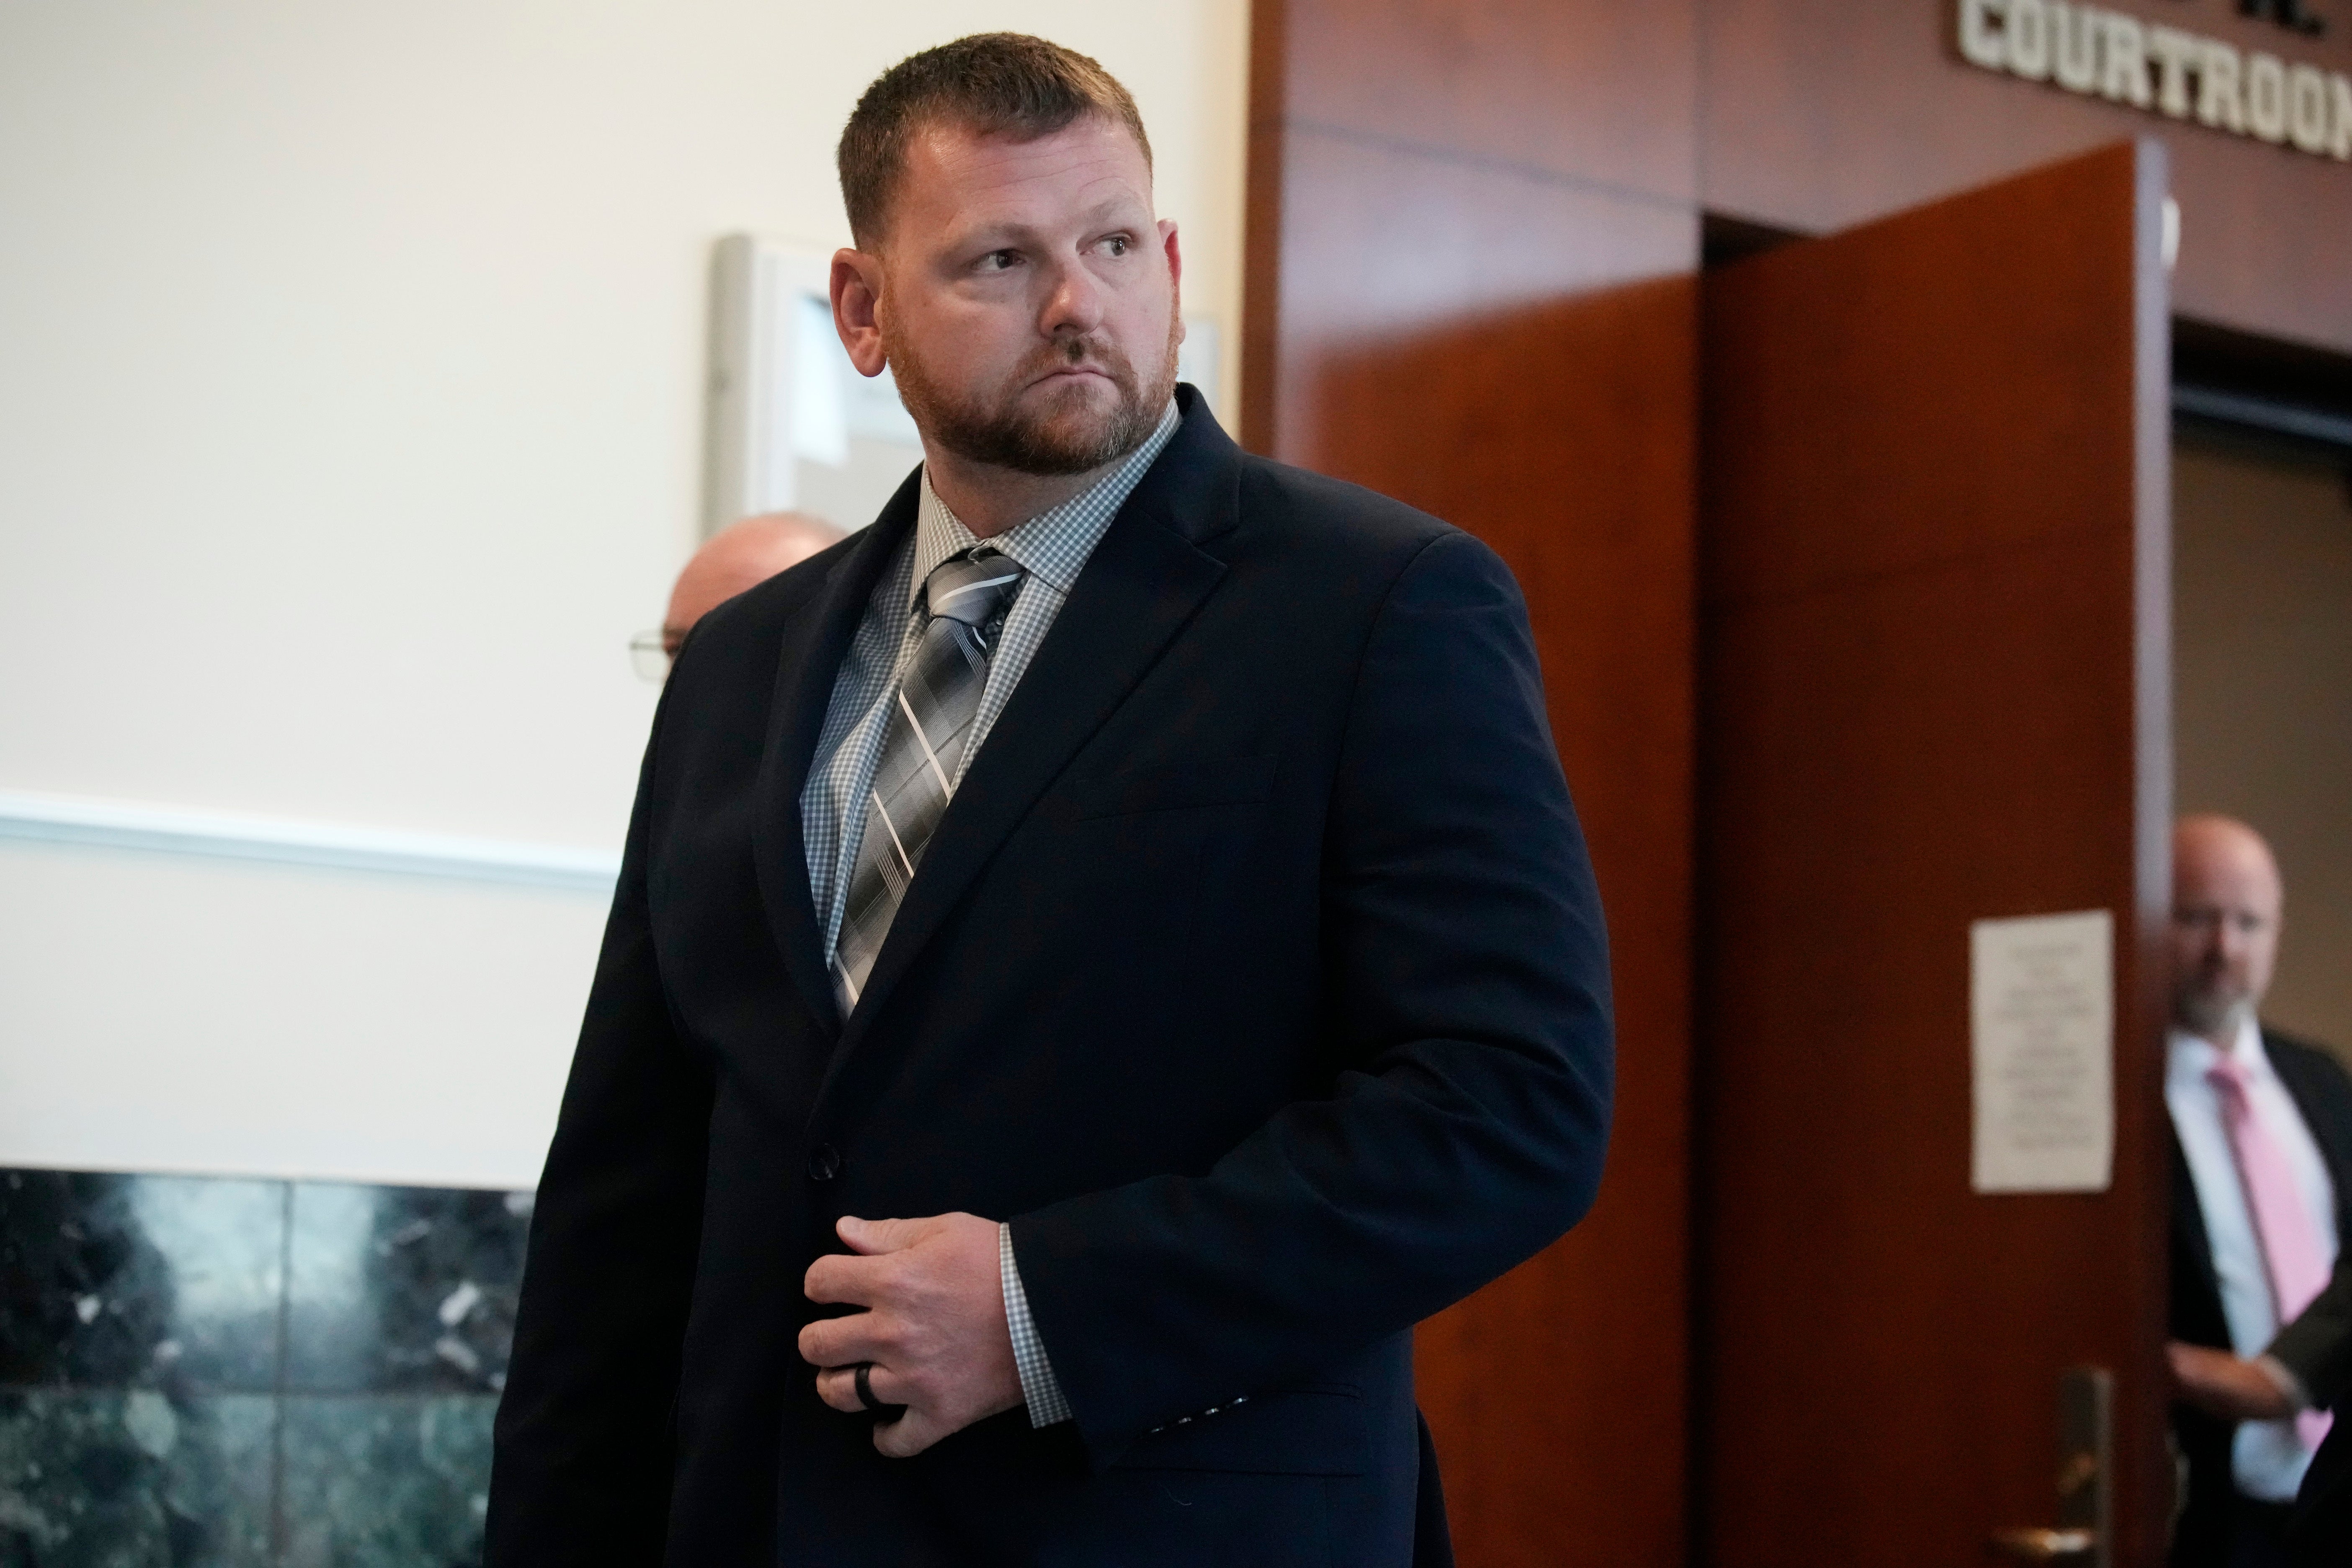 FILE - Former Aurora, Colo., Police Department officer Randy Roedema leaves the courtroom after being convicted of charges in the 2019 death of Elijah McClain during a trial in the Adams County, Colo., Courthouse, Oct. 12, 2023, in Brighton, Colo. The only police officer convicted of killing McClain faces anywhere from probation to several years behind bars when a judge decides his punishment Friday, Jan. 5, 2024. (AP Photo/David Zalubowski, File)